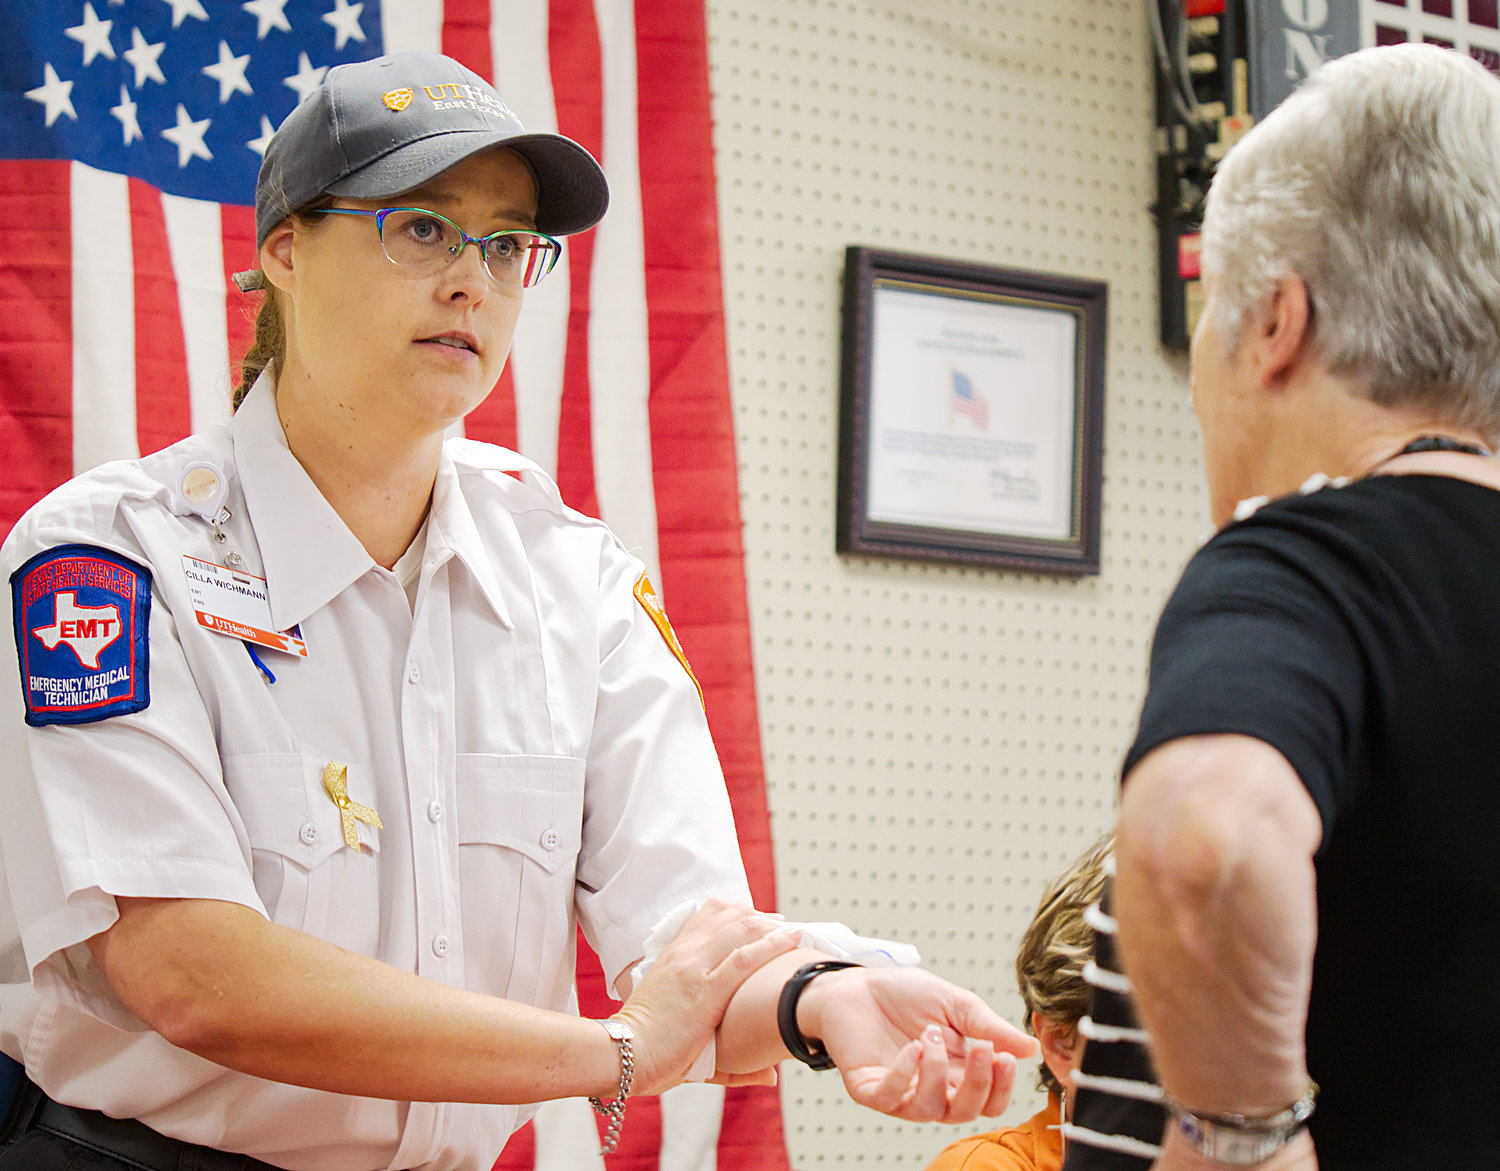 Cilla Wichmann, with UT Health EMS, demonstrates one of the Stop the Bleed methods for Elaine Douglas during the annual health fair last Thursday at the Forever Young senior center in Quitman.